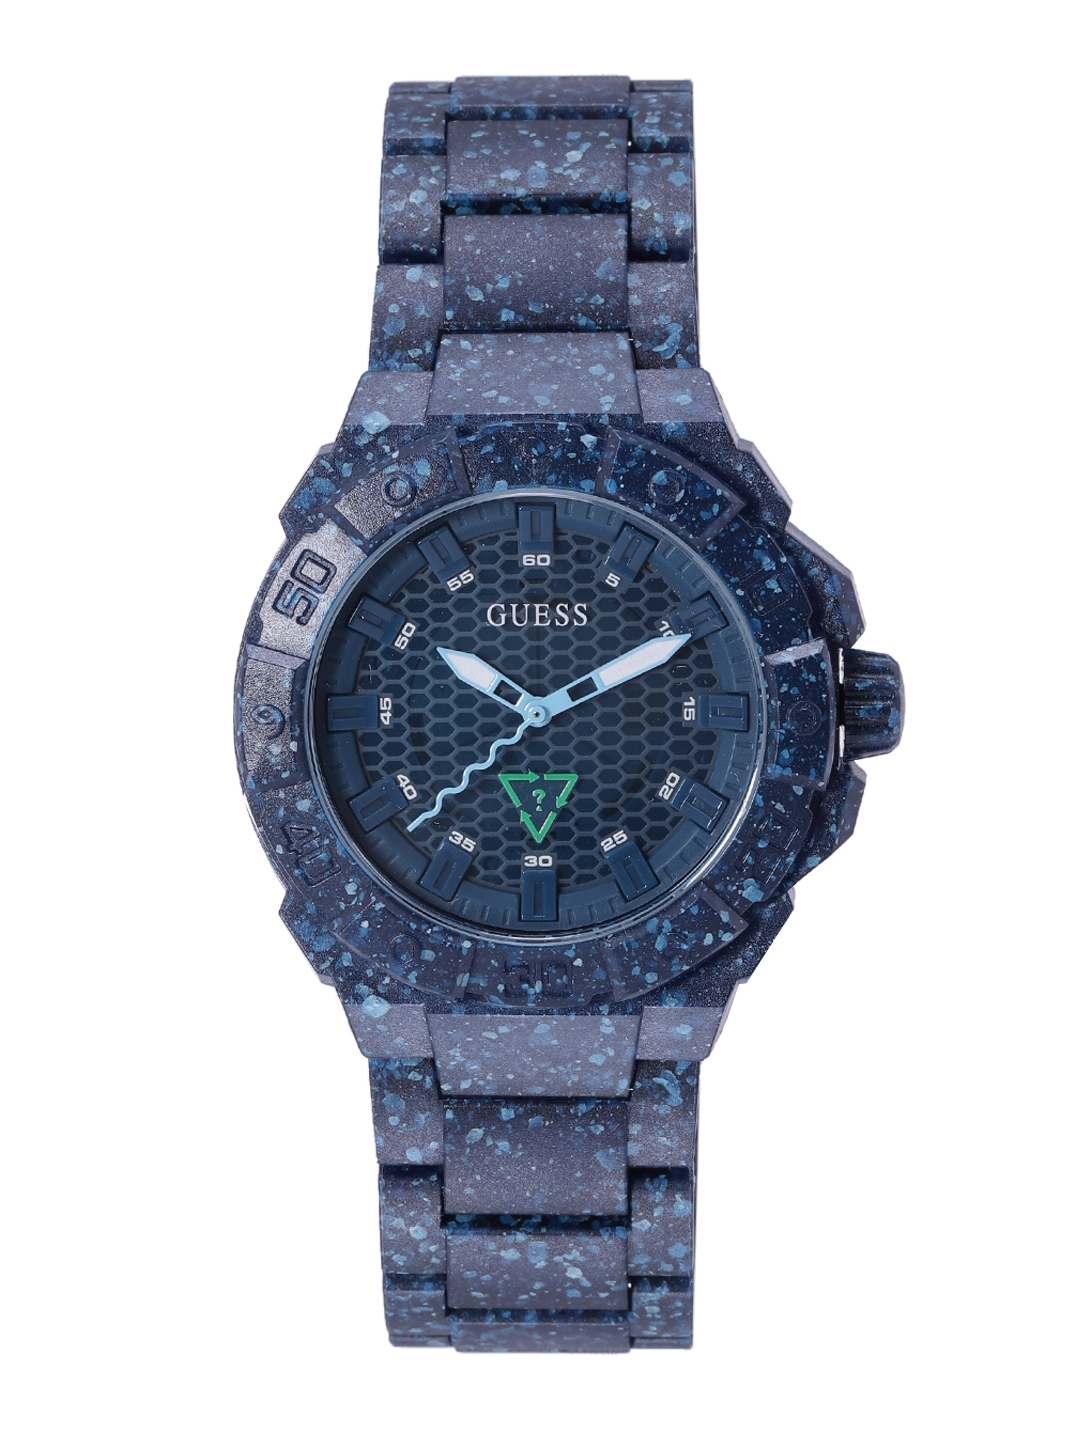 

GUESS Unisex Bracelet Style Straps Analogue Solar Powered Watch- GW0507G1, Navy blue